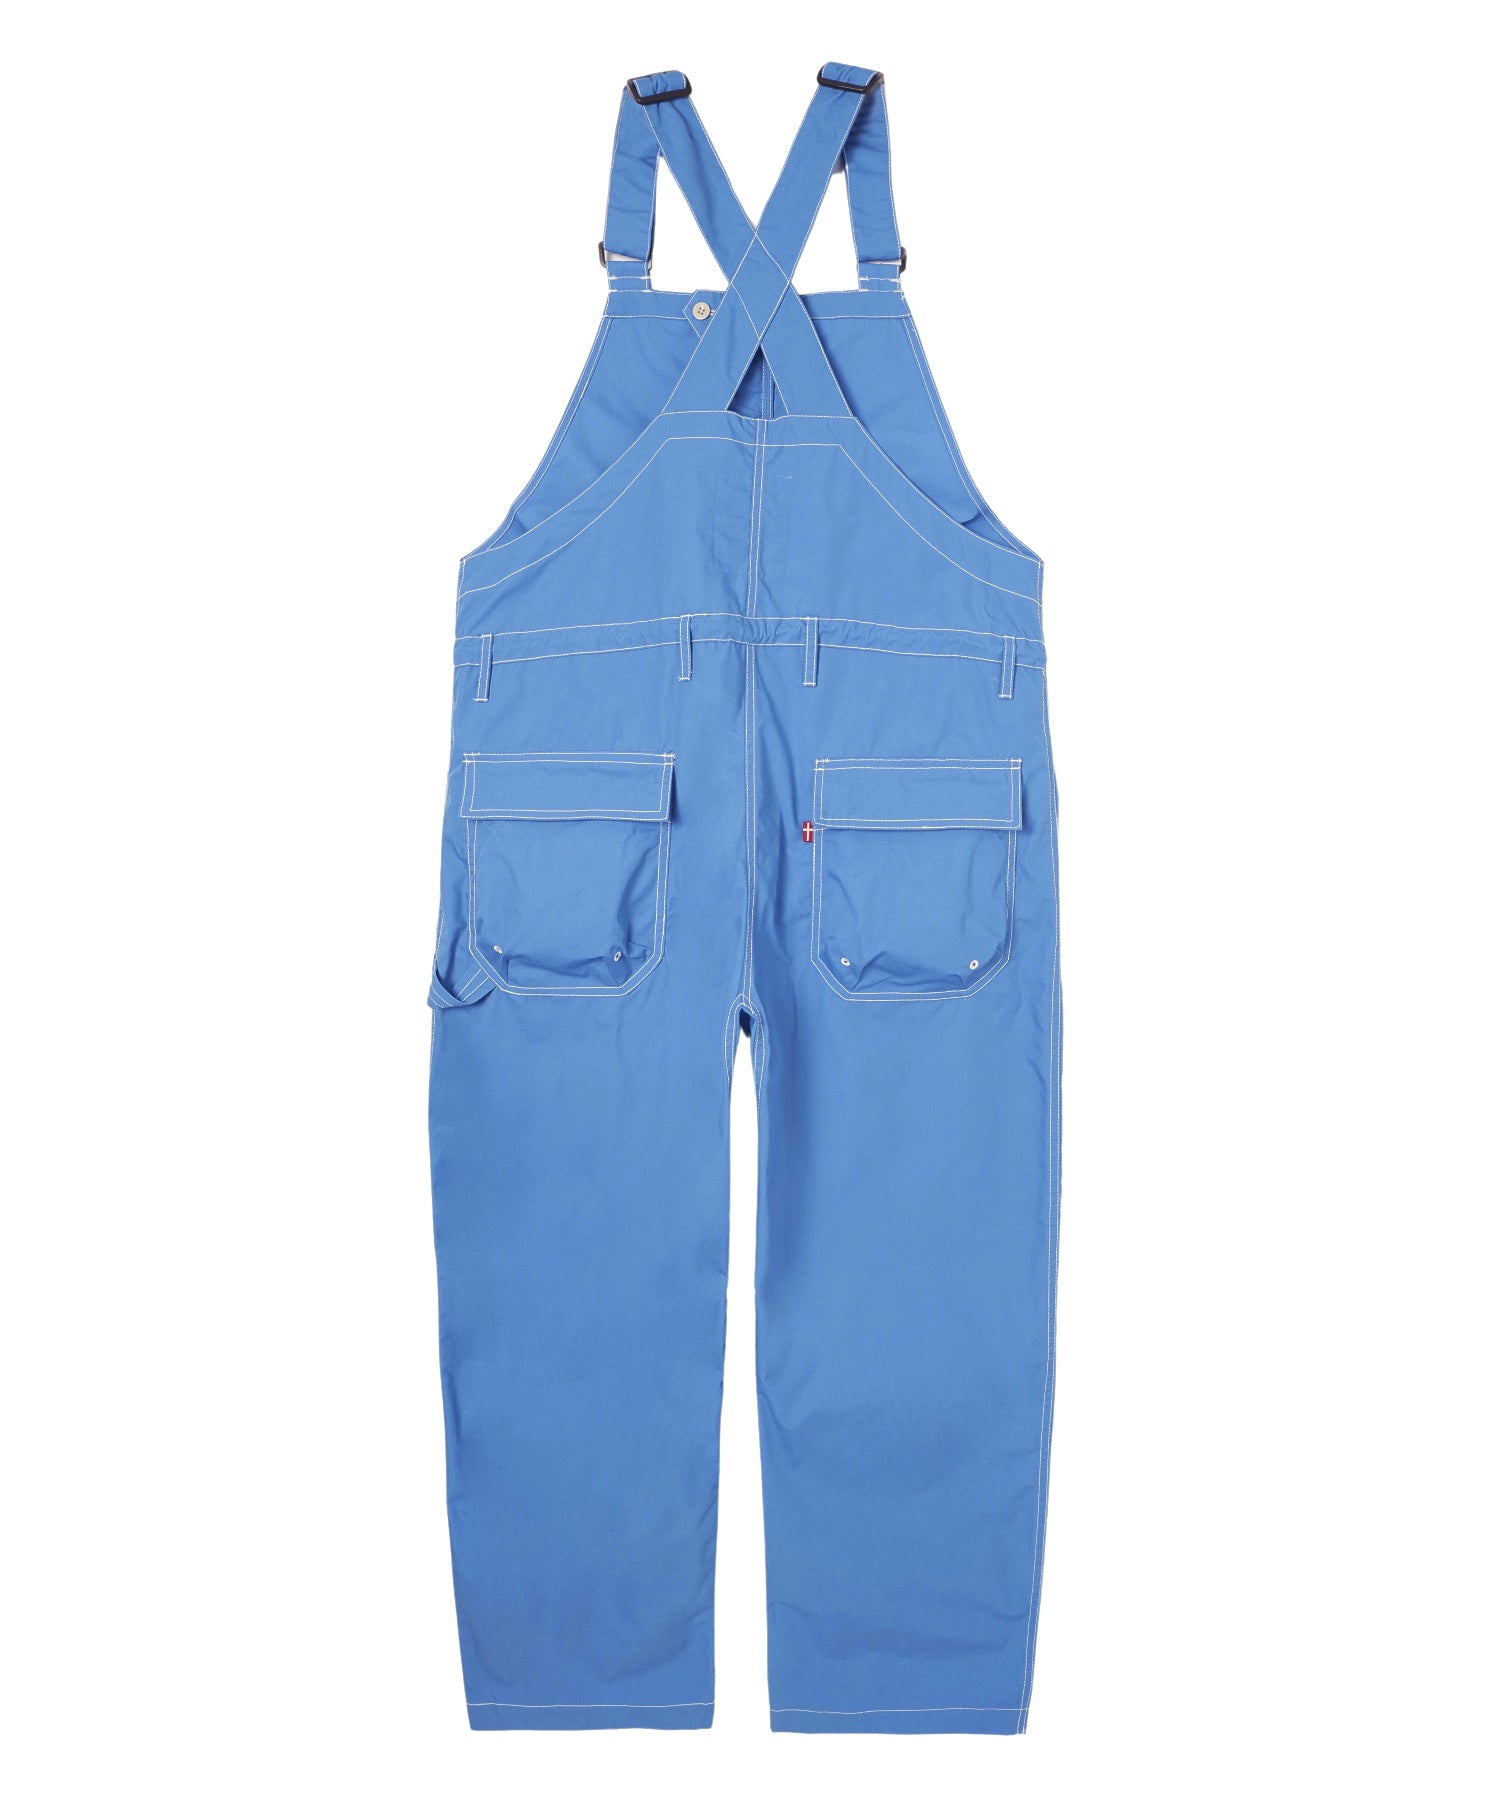 NORDISK/ノルディスク/TECHNICAL COTTON DECK OVERALL/NU61301